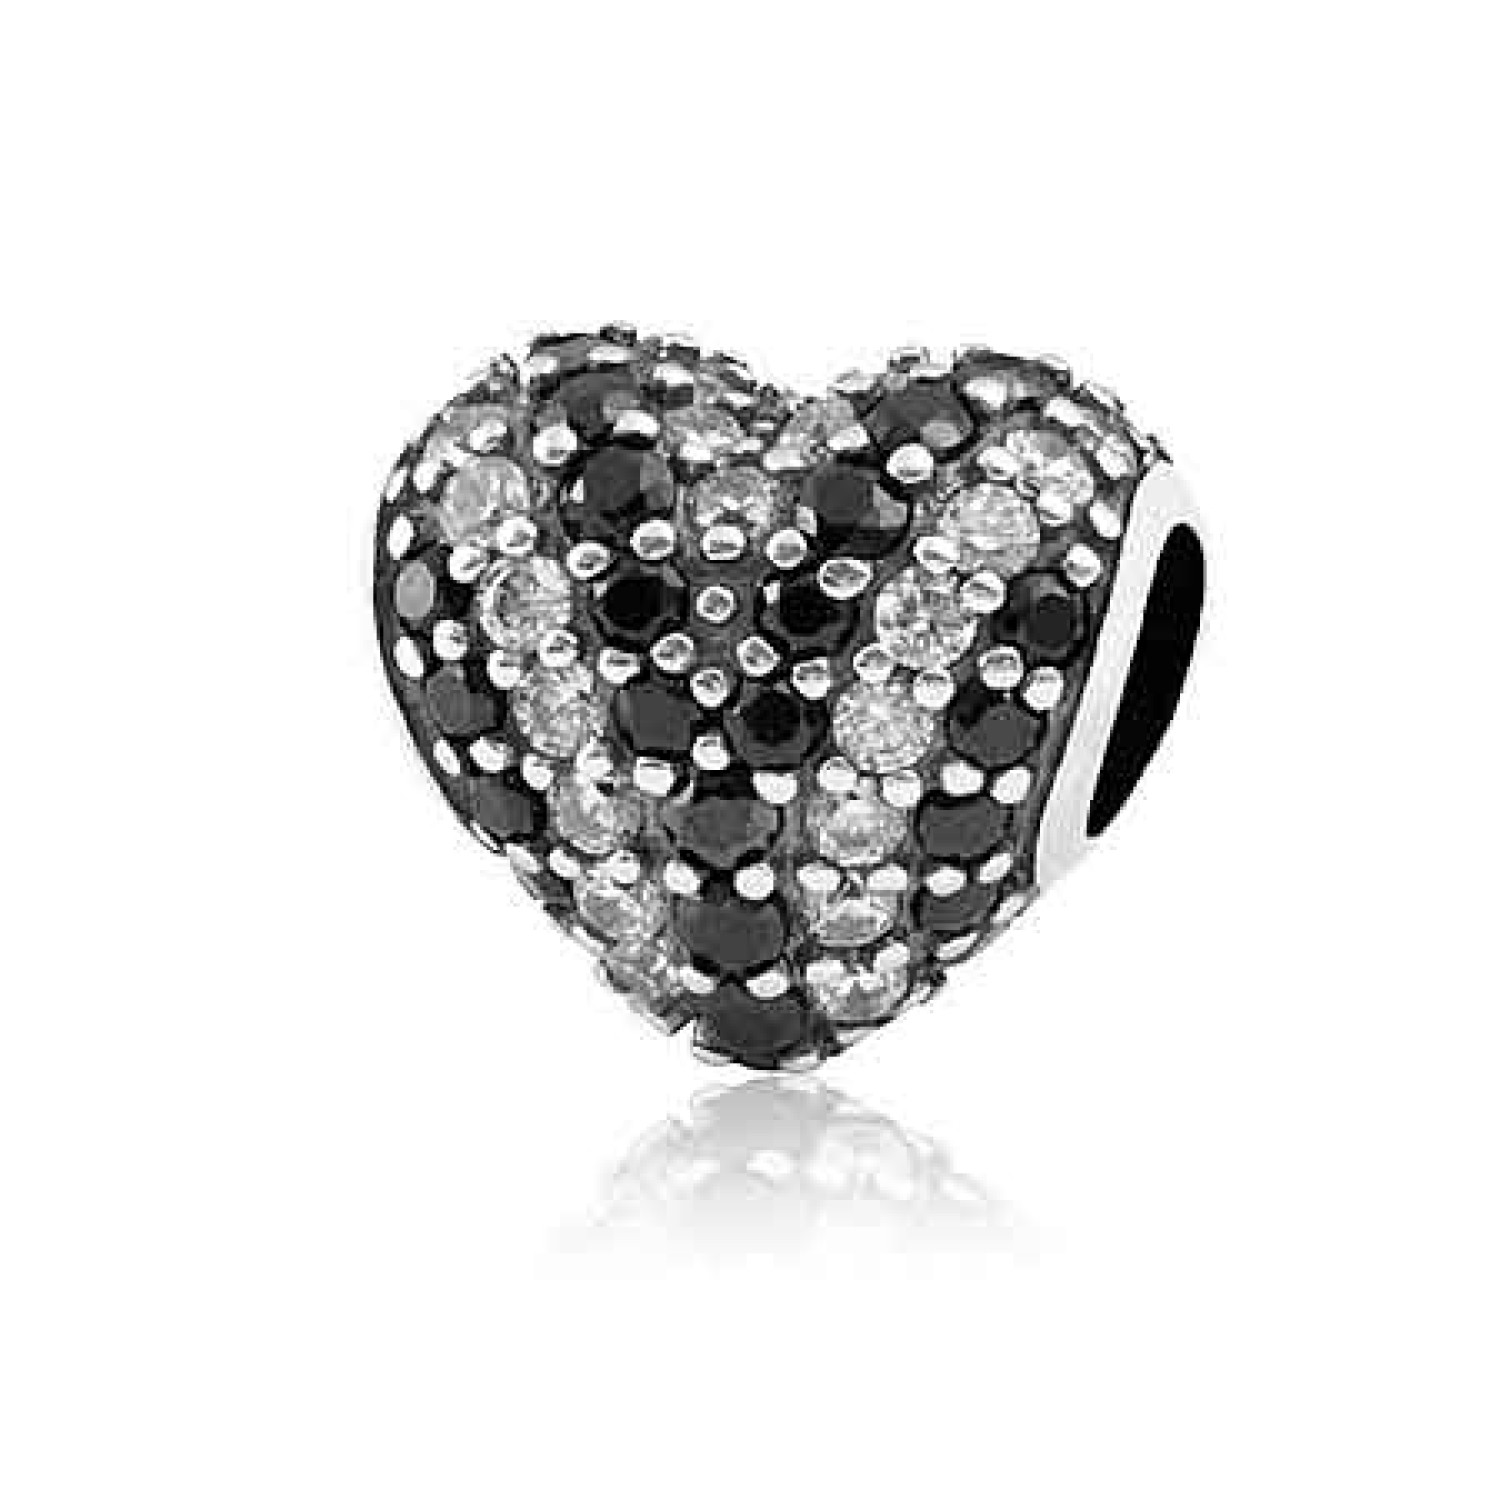 LK238SP Evolve Silver Charm Heart of Stars. Our sparkling black and white heart was especially created for those who truly have a heart of stars, whose kindness and inspiring spirit will be treasured forever. This exquisitely beautiful charm honours those